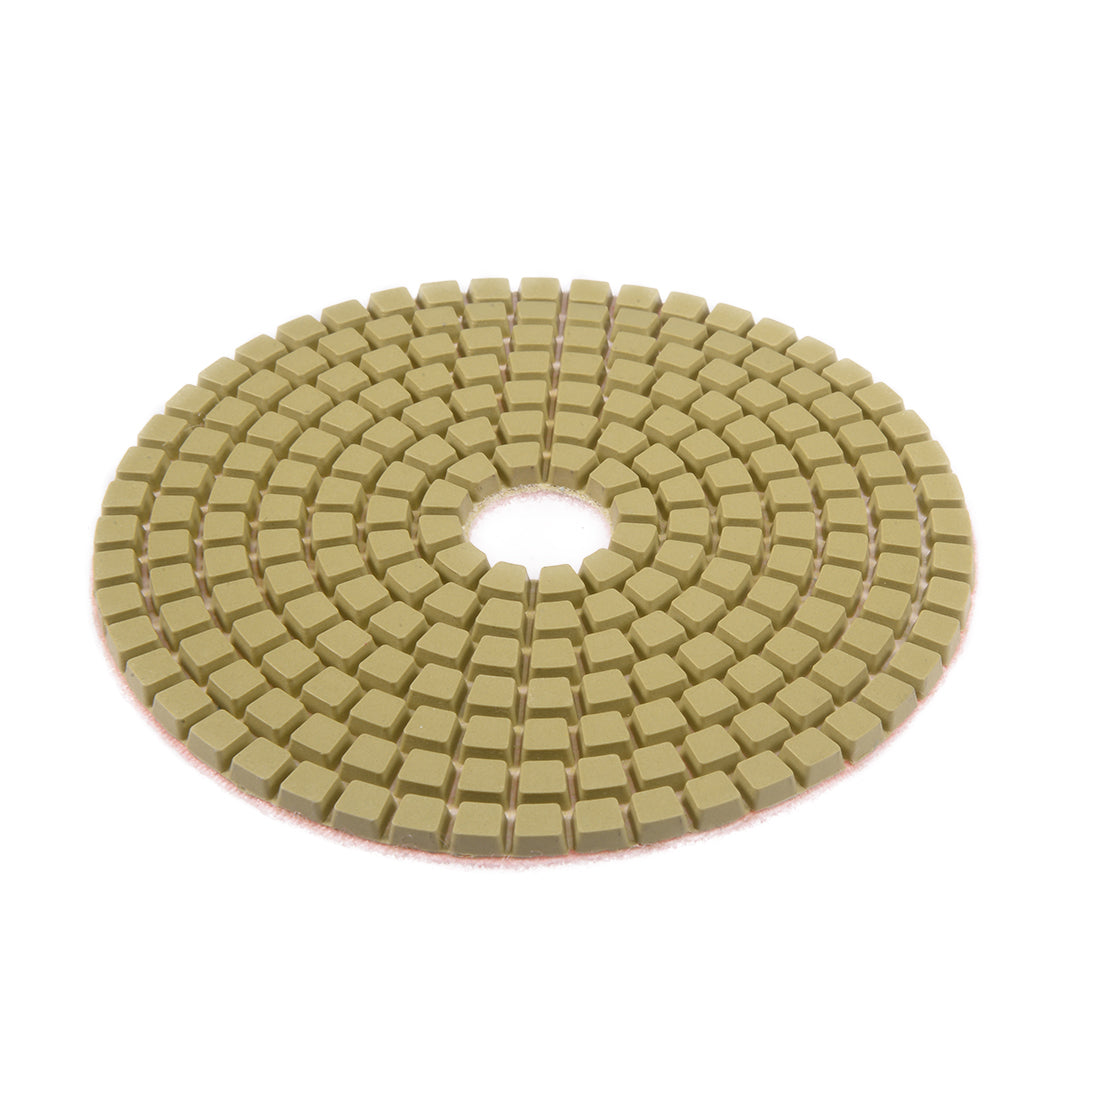 uxcell Uxcell Diamond Polishing Sanding Grinding Pads Discs 4 Inch Grit 3000 10 Pcs for Granite Concrete Stone Marble